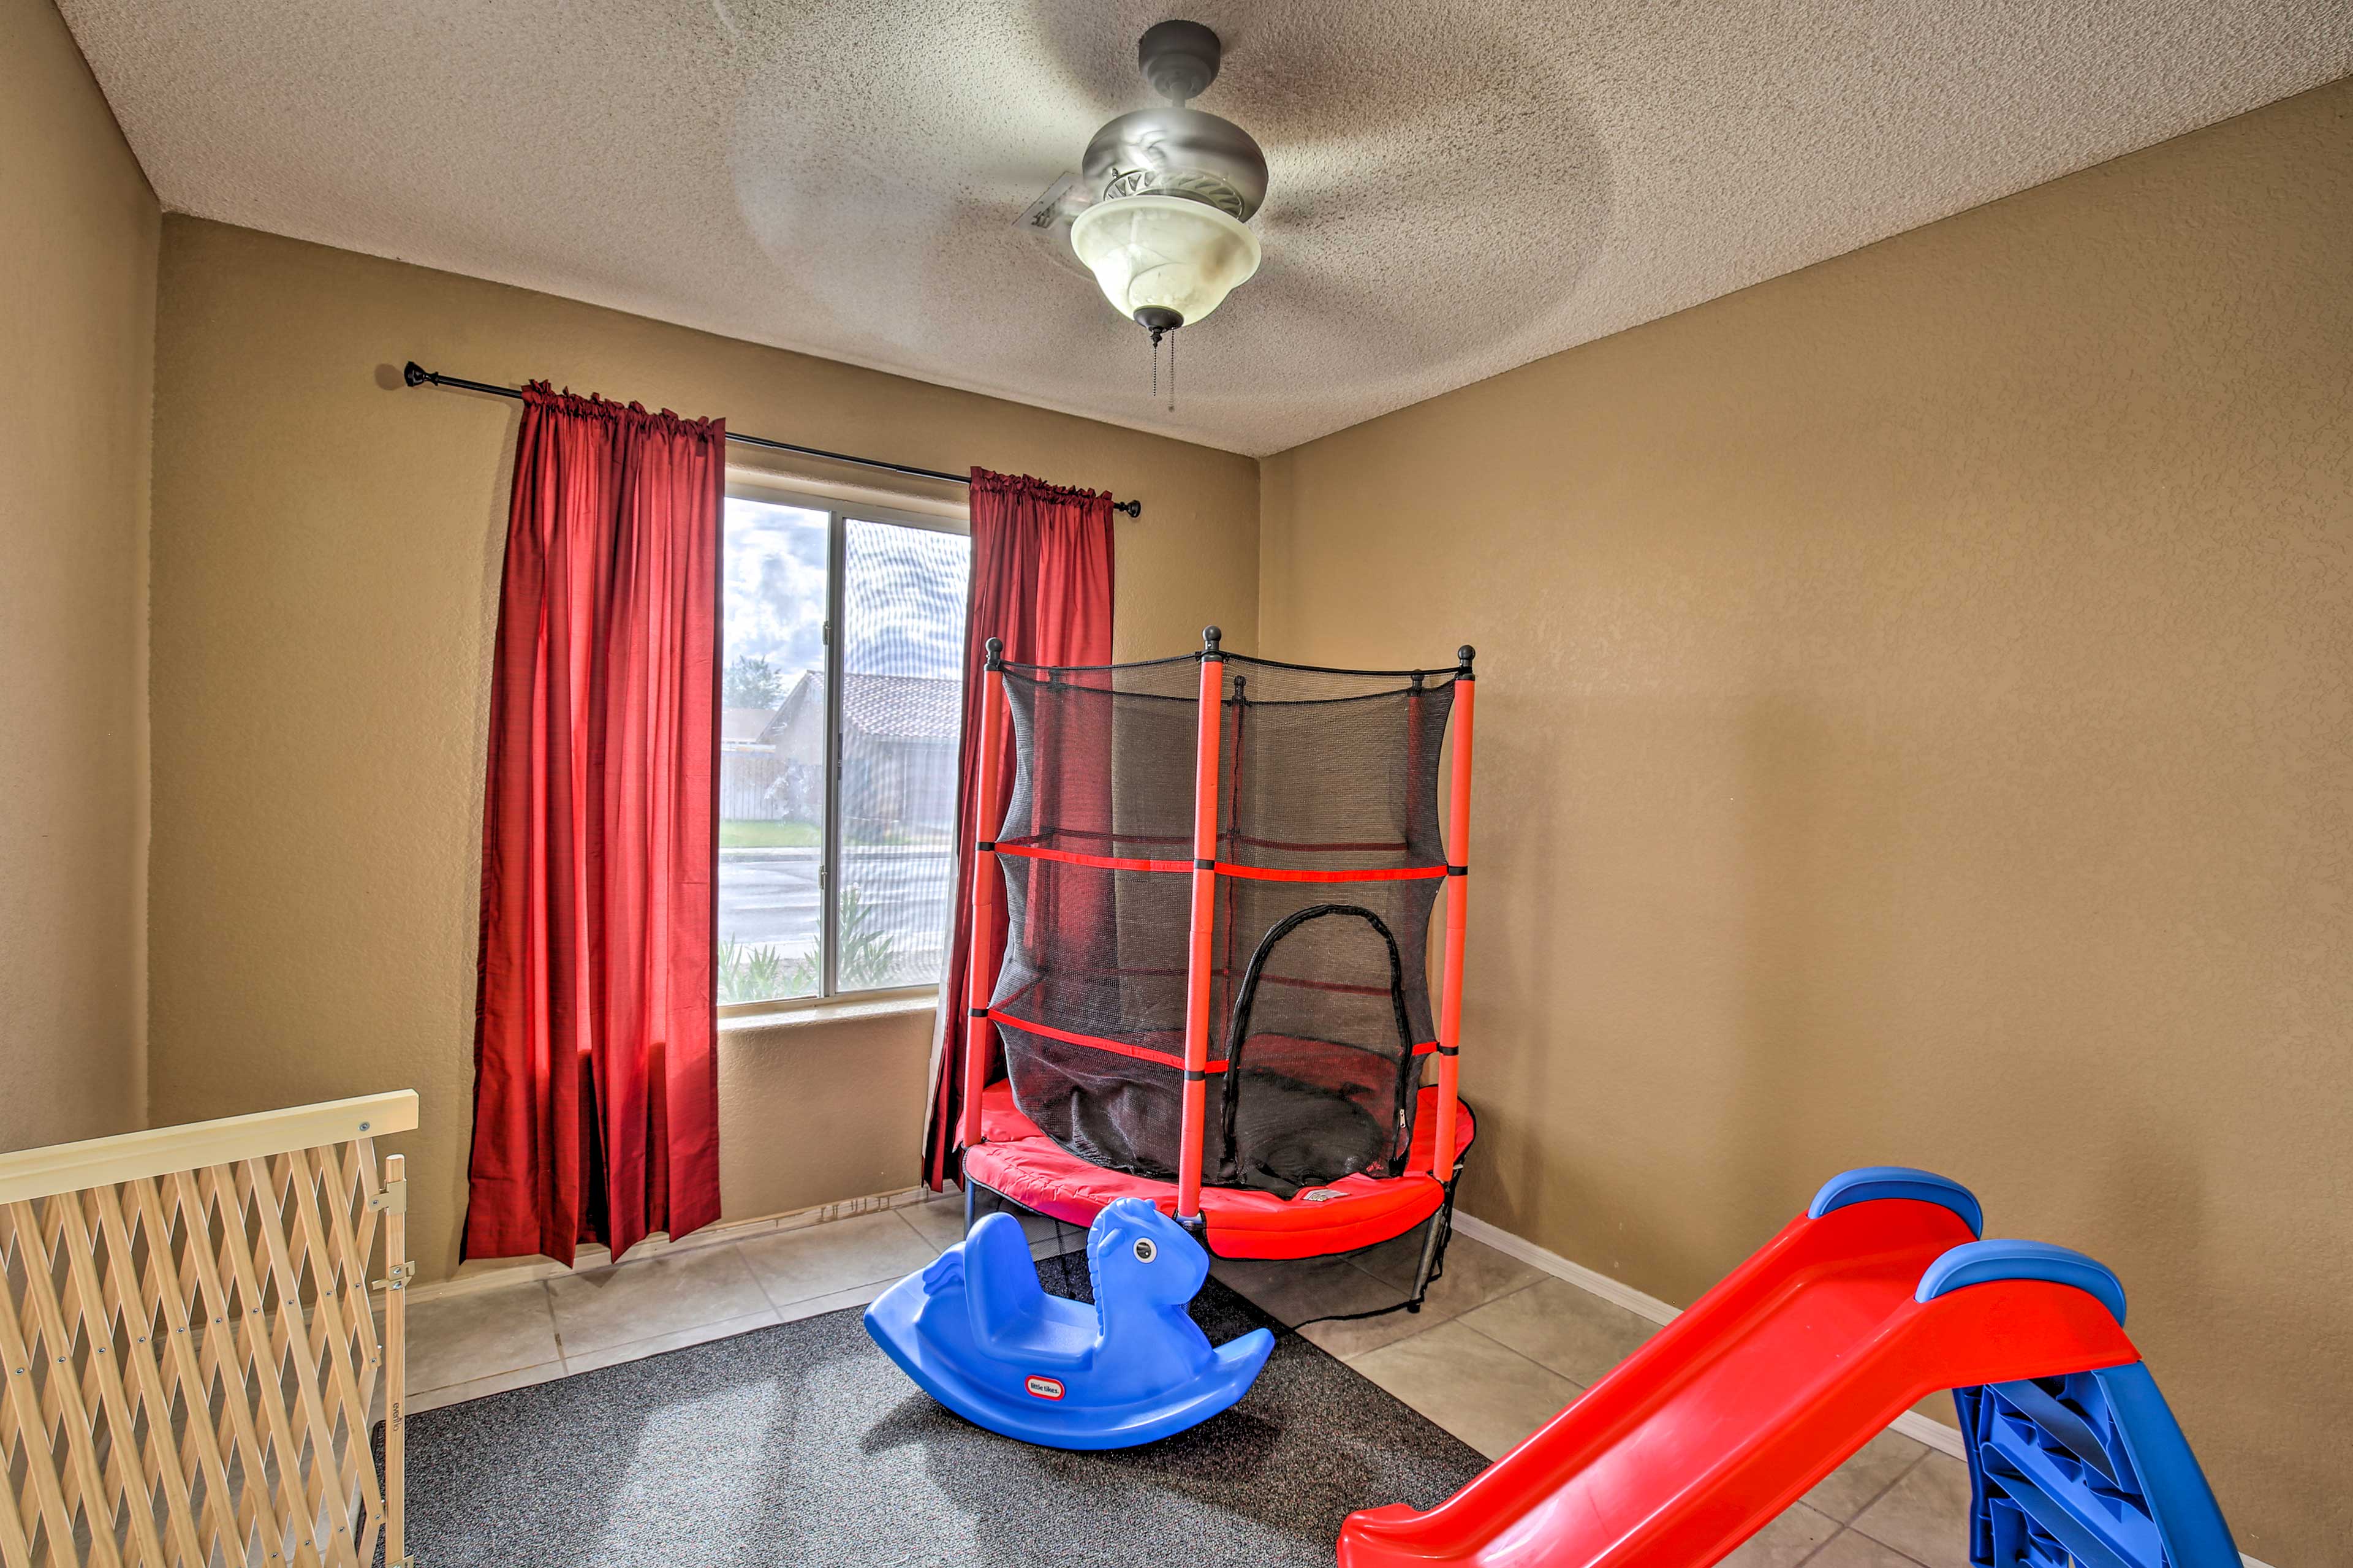 The play room offers a trampoline, slide and rocking horse.